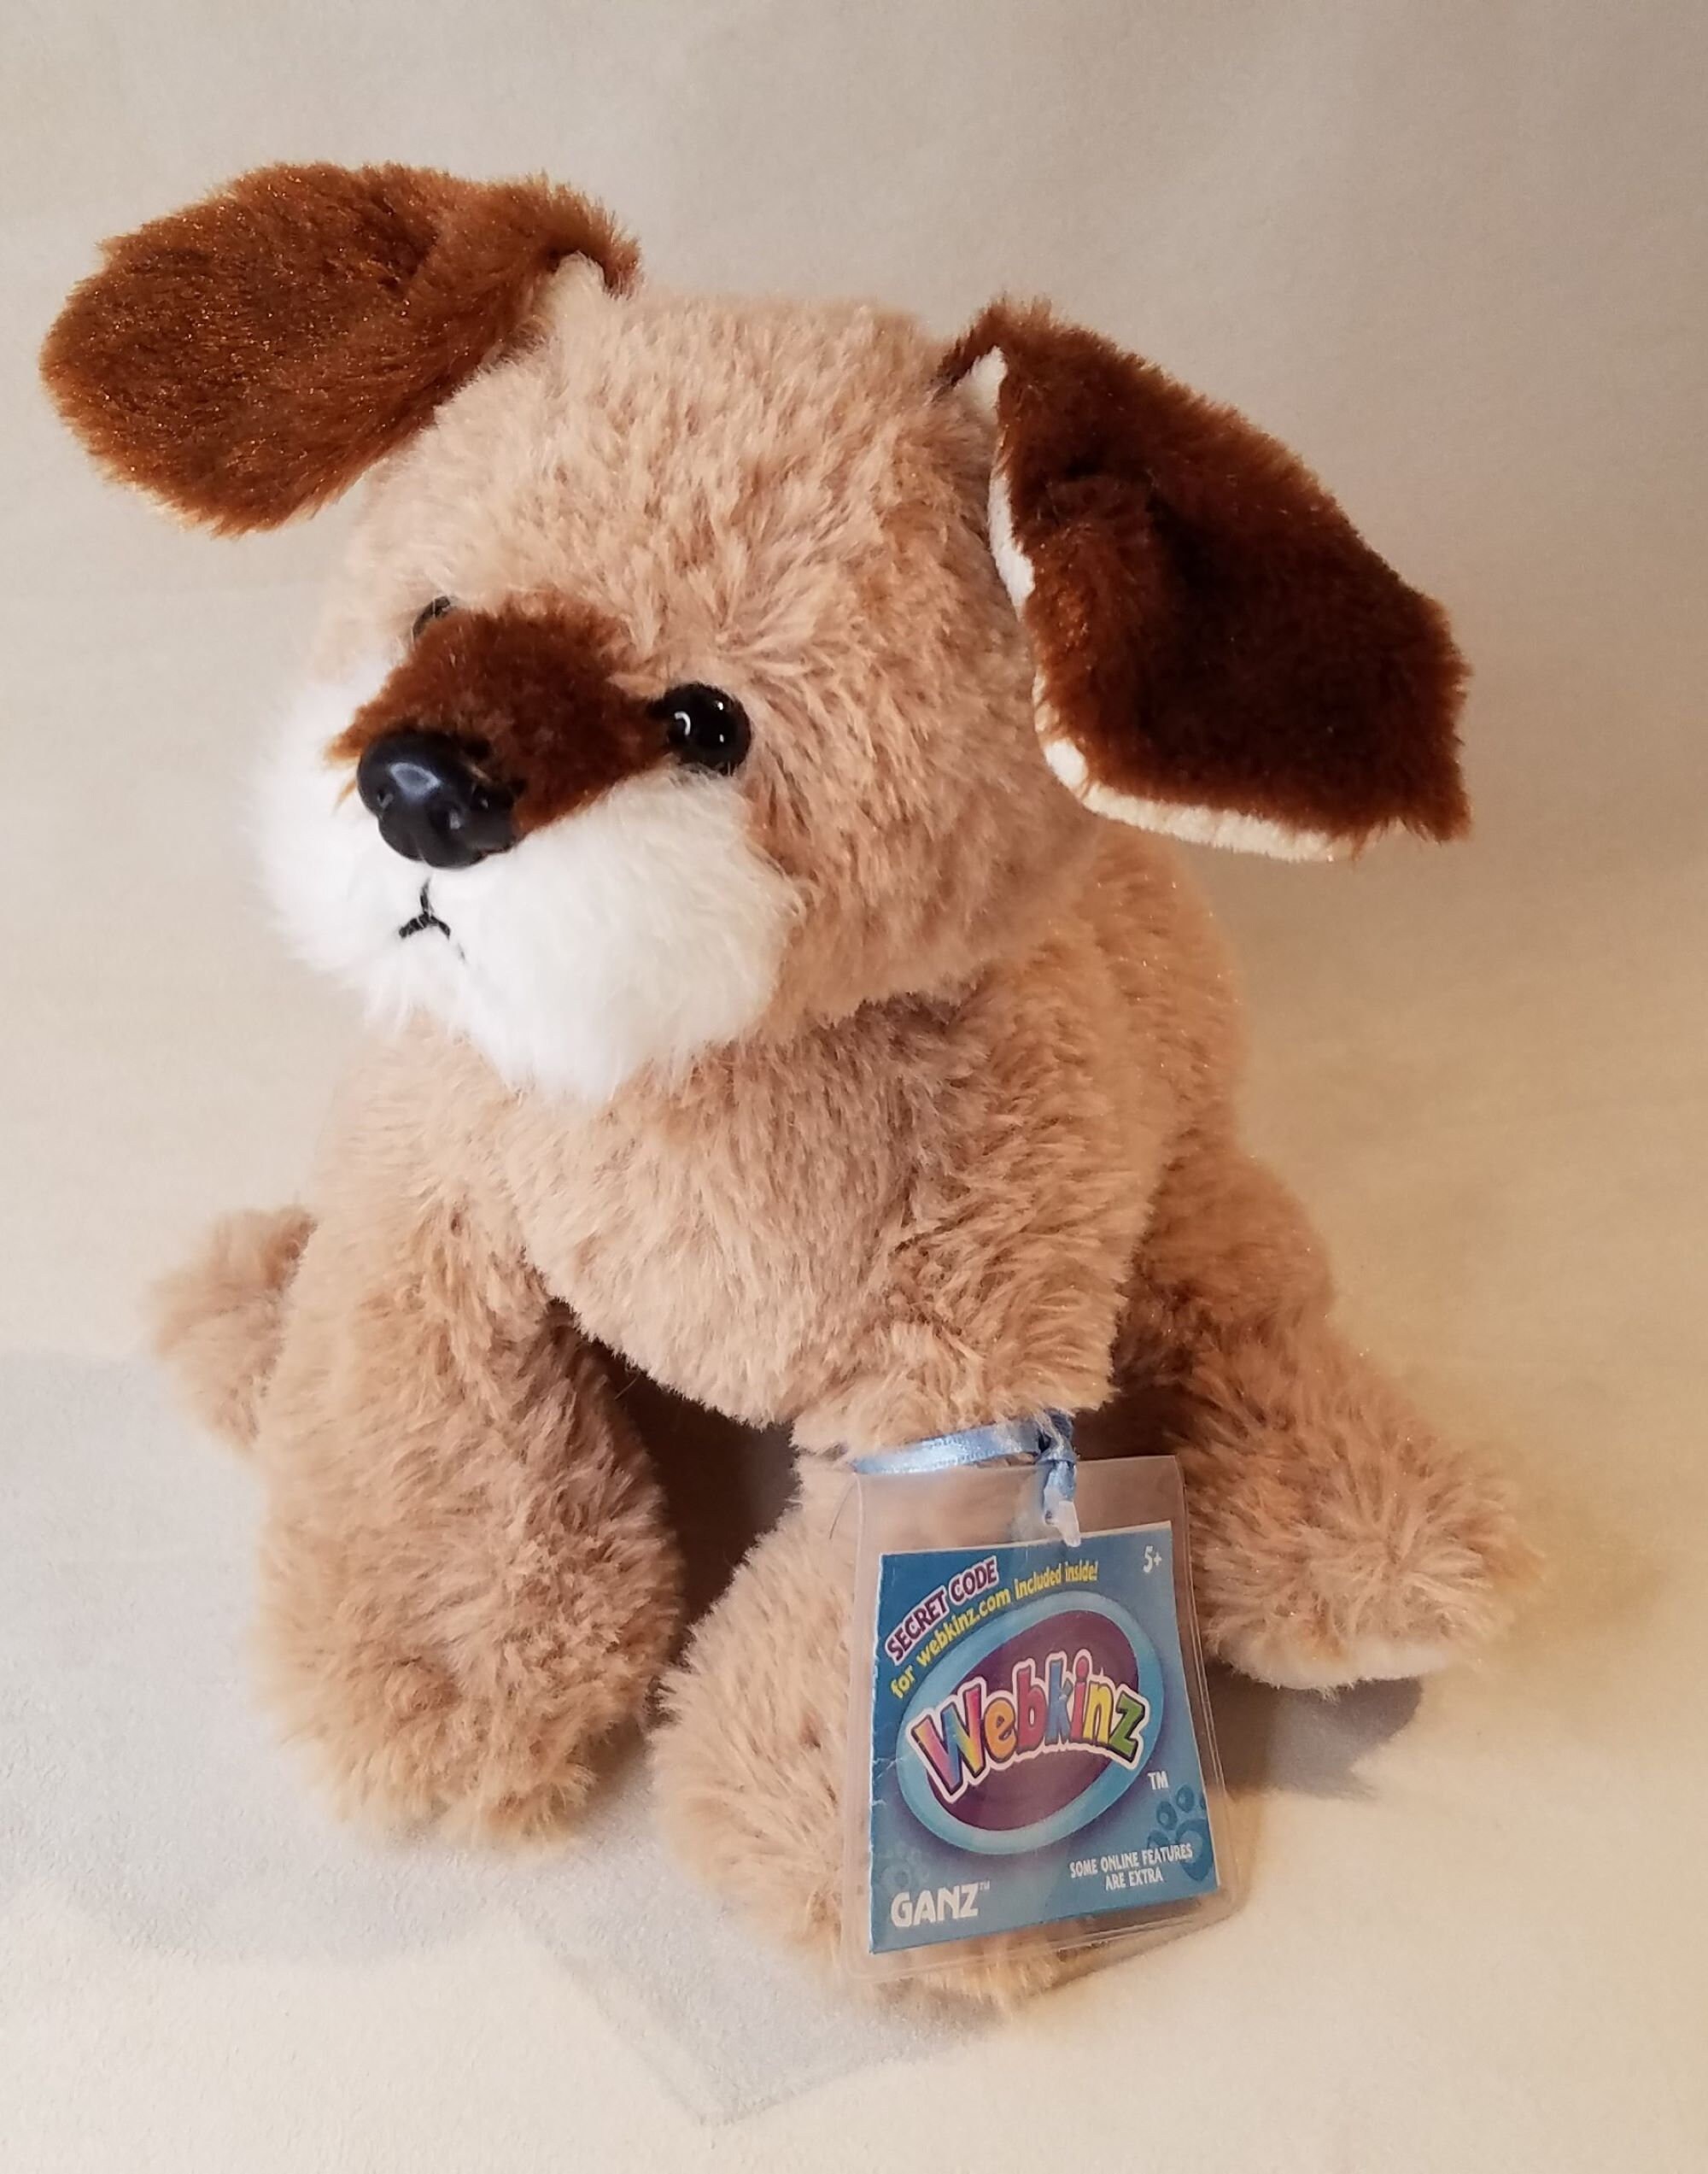 Ganz Webkinz Brown Sugar Puppy Plush HM740 Brand New with Tags and Code 